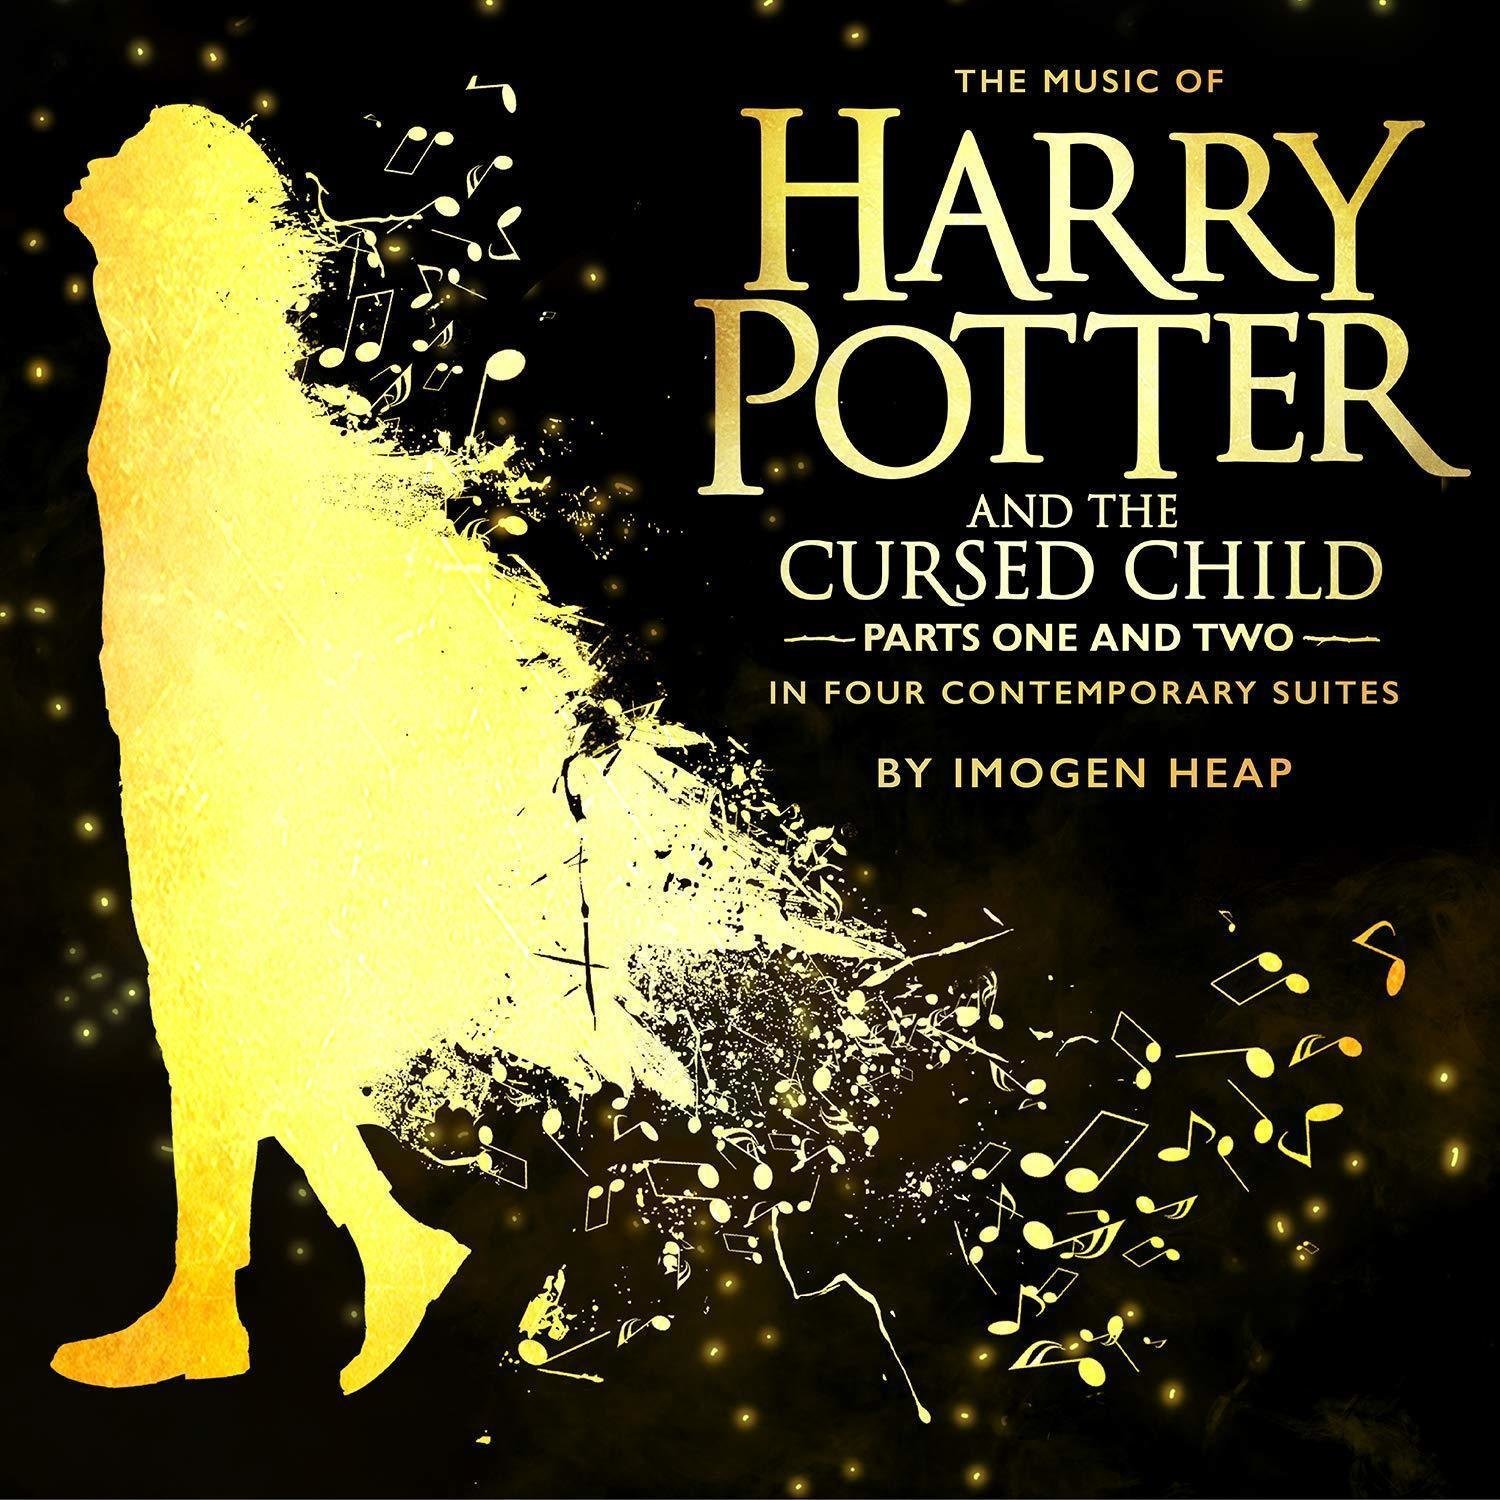 Vinylskiva Imogen Heap Music of Harry Potter and the Cursed Child - In Four Contemporary Suites (2 LP)